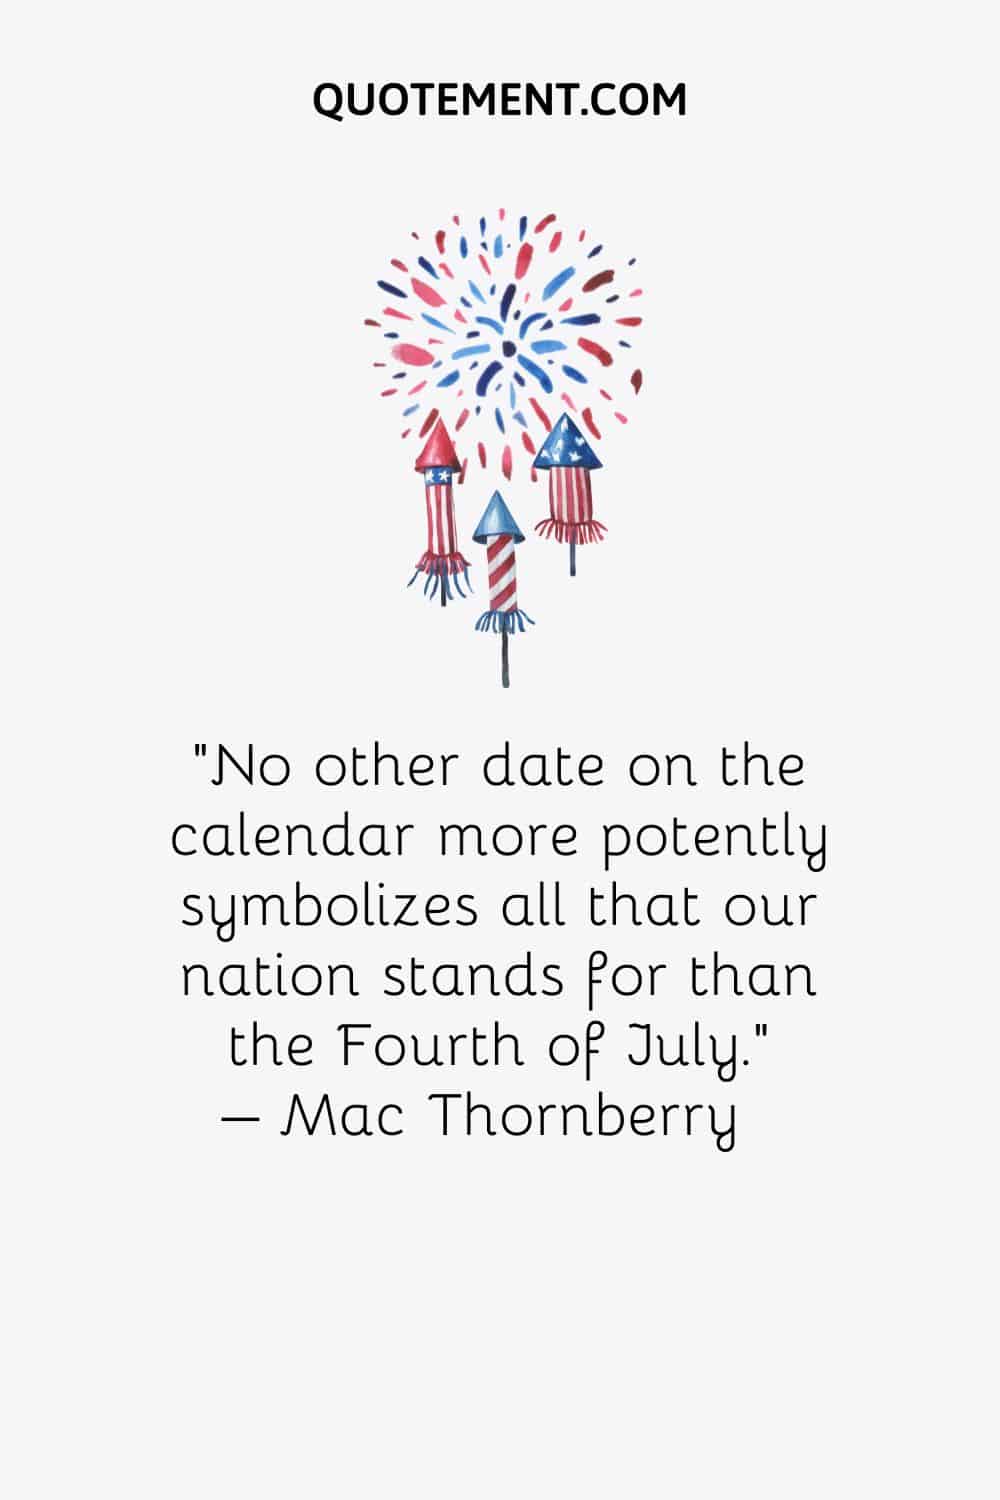 No other date on the calendar more potently symbolizes all that our nation stands for than the Fourth of July. – Mac Thornberr